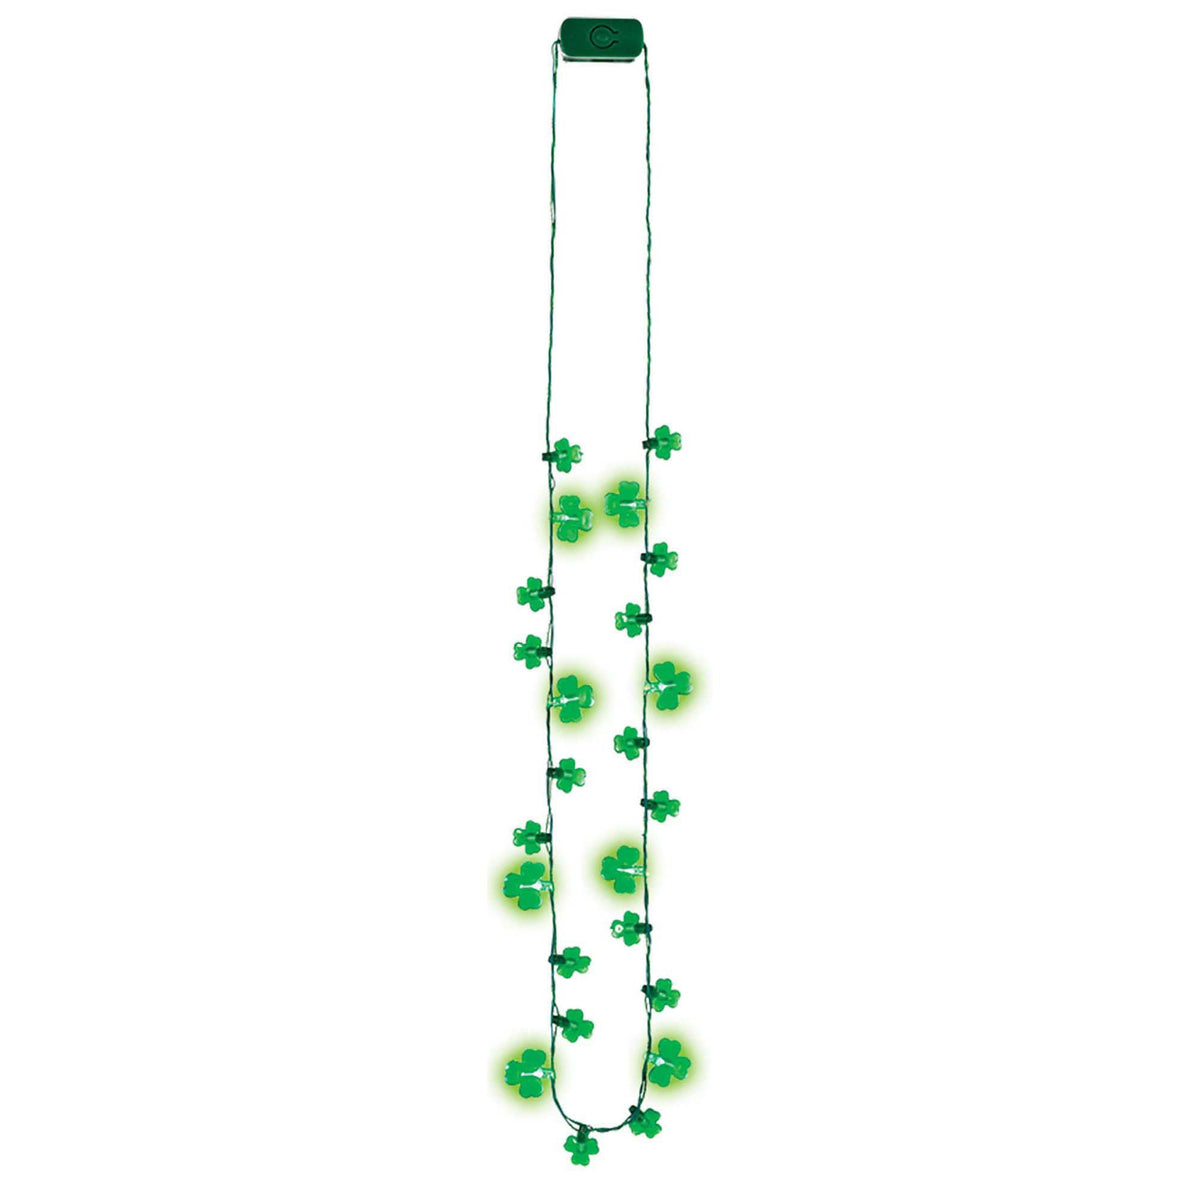 AMSCAN CA St-Patrick St-Patrick's Day Light-Up Necklace, 1 Count